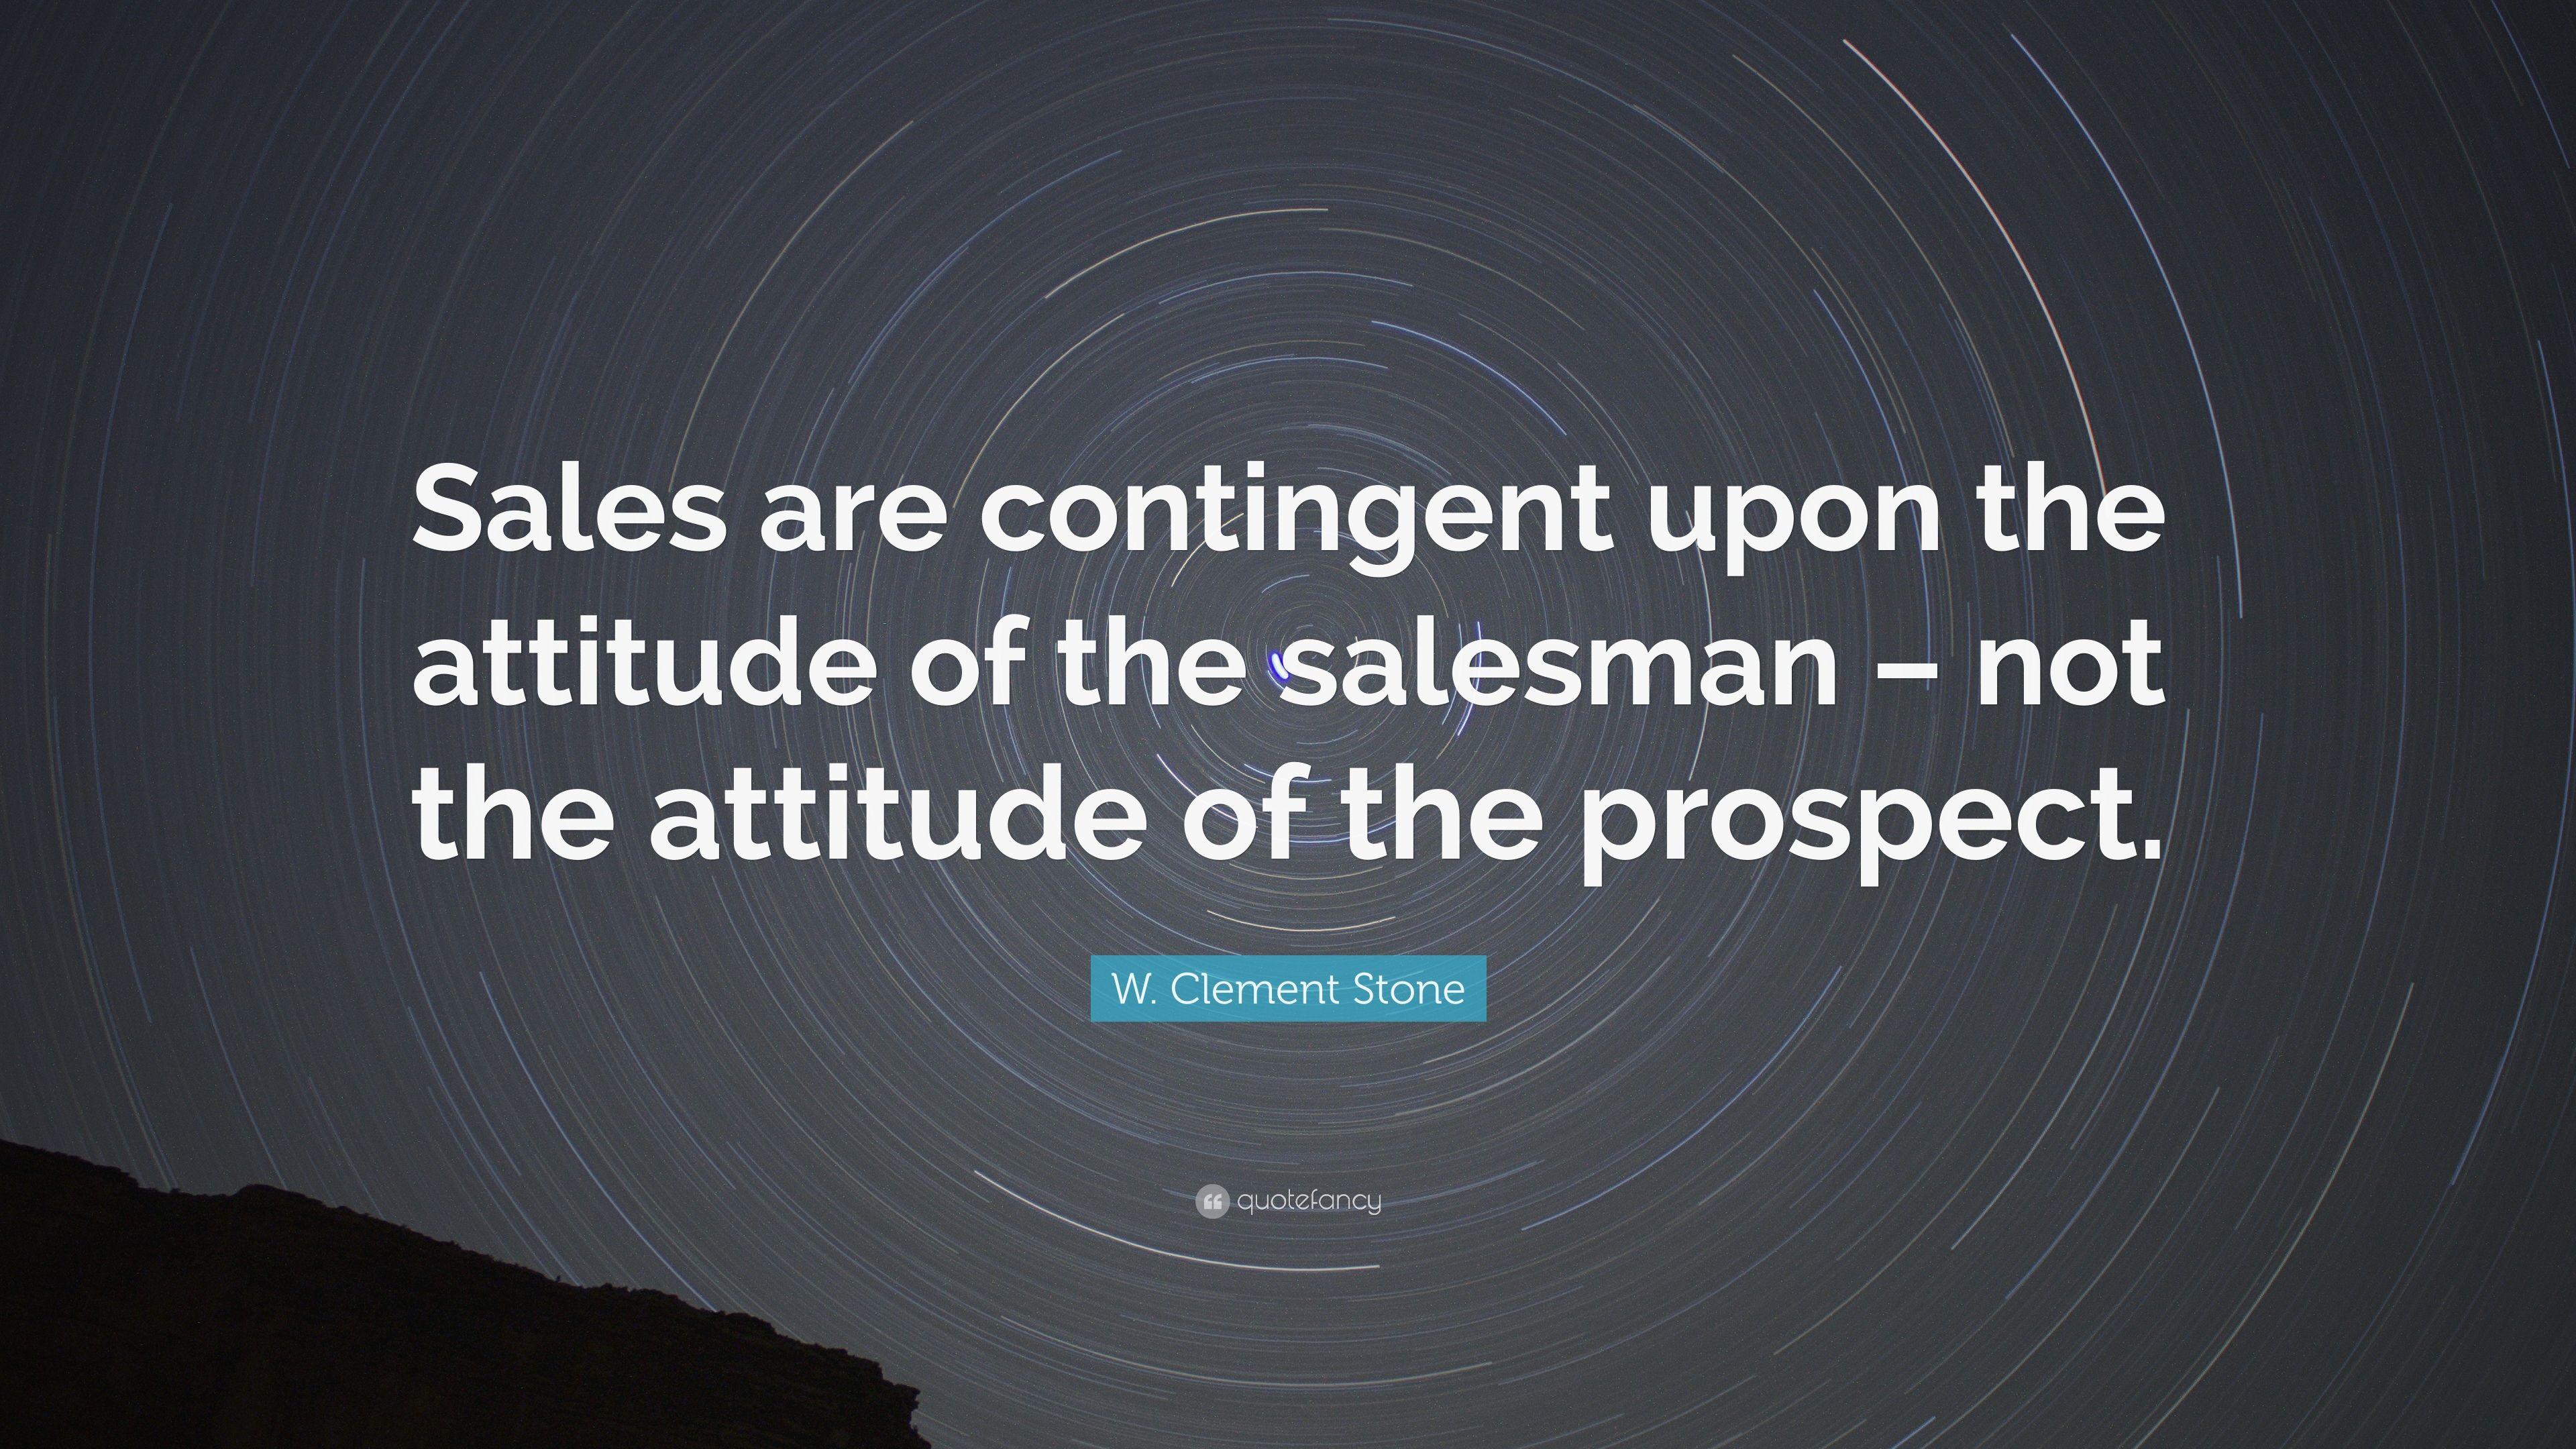 W. Clement Stone Quote: “Sales are contingent upon the attitude